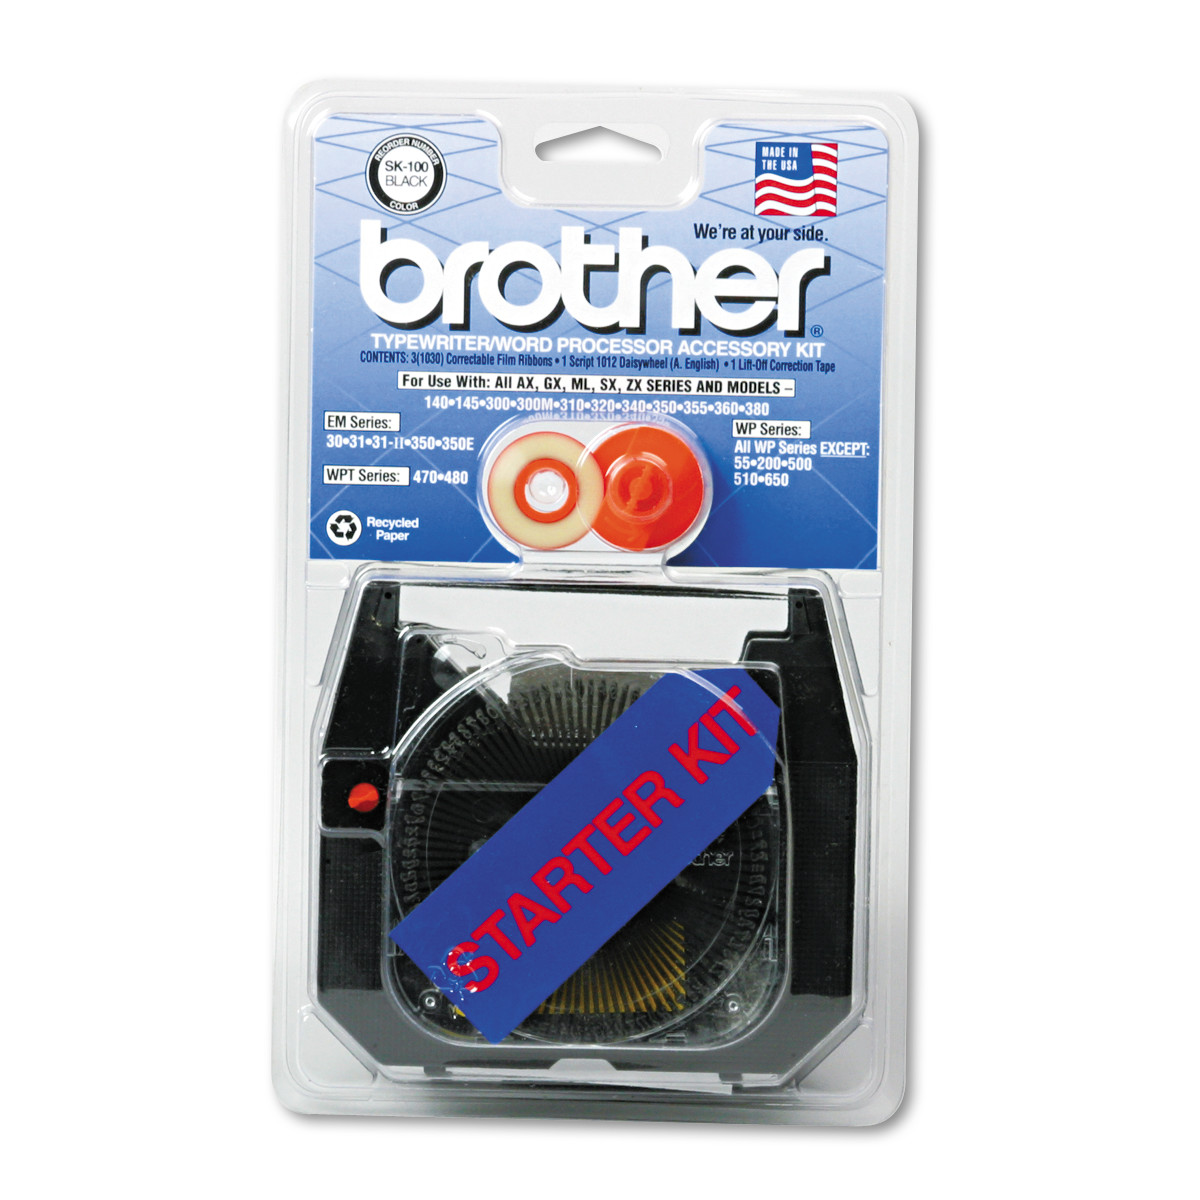 Brother-SK100